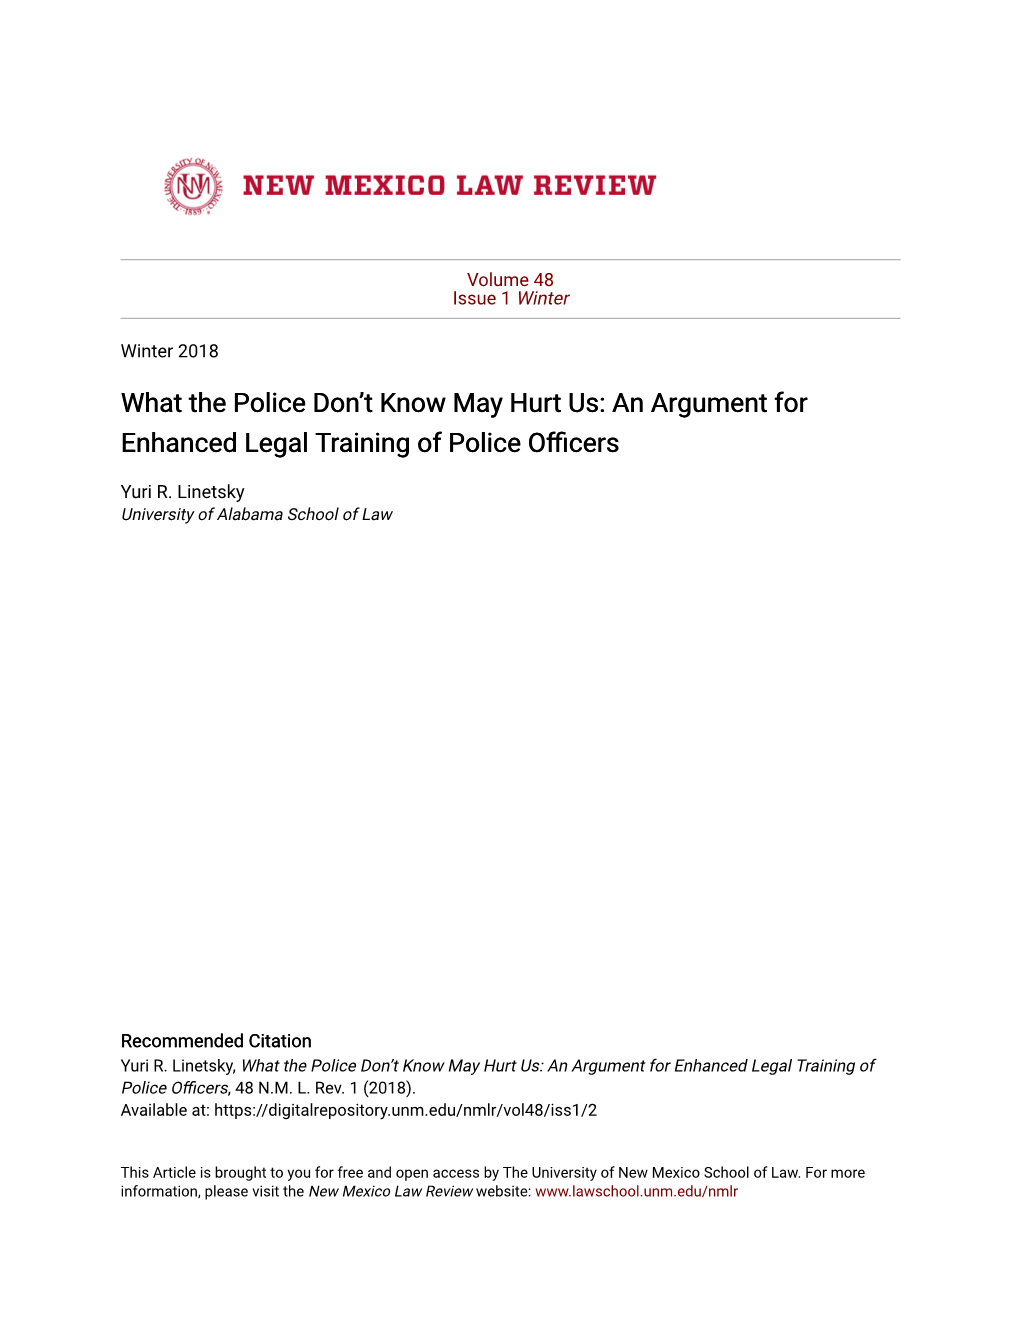 An Argument for Enhanced Legal Training of Police Officers